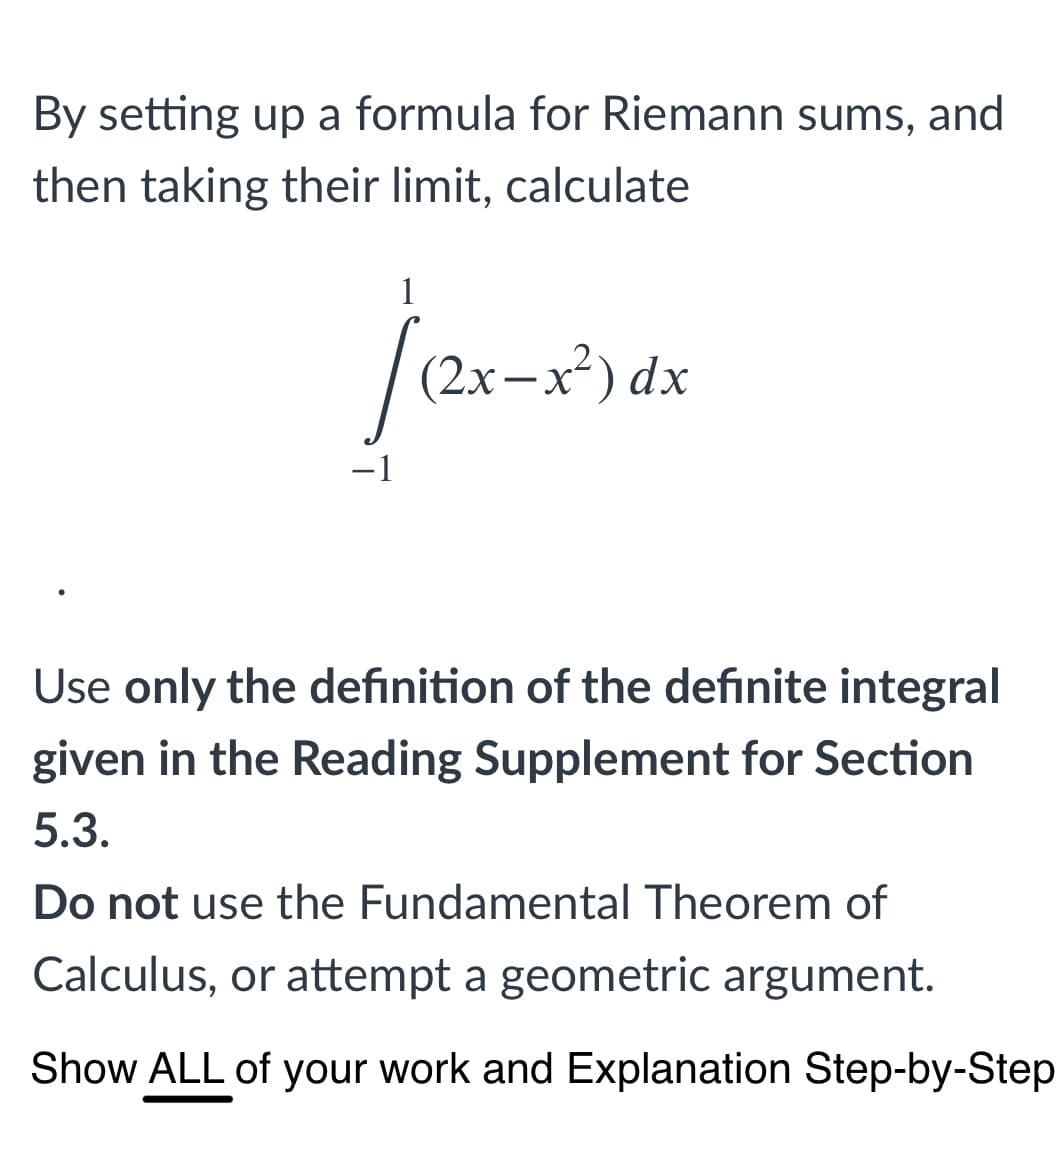 By setting up a formula for Riemann sums, and
then taking their limit, calculate
1
|(2x-x³).
-1
Use only the definition of the definite integral
given in the Reading Supplement for Section
5.3.
Do not use the Fundamental Theorem of
Calculus, or attempt a geometric argument.
Show ALL of your work and Explanation Step-by-Step
